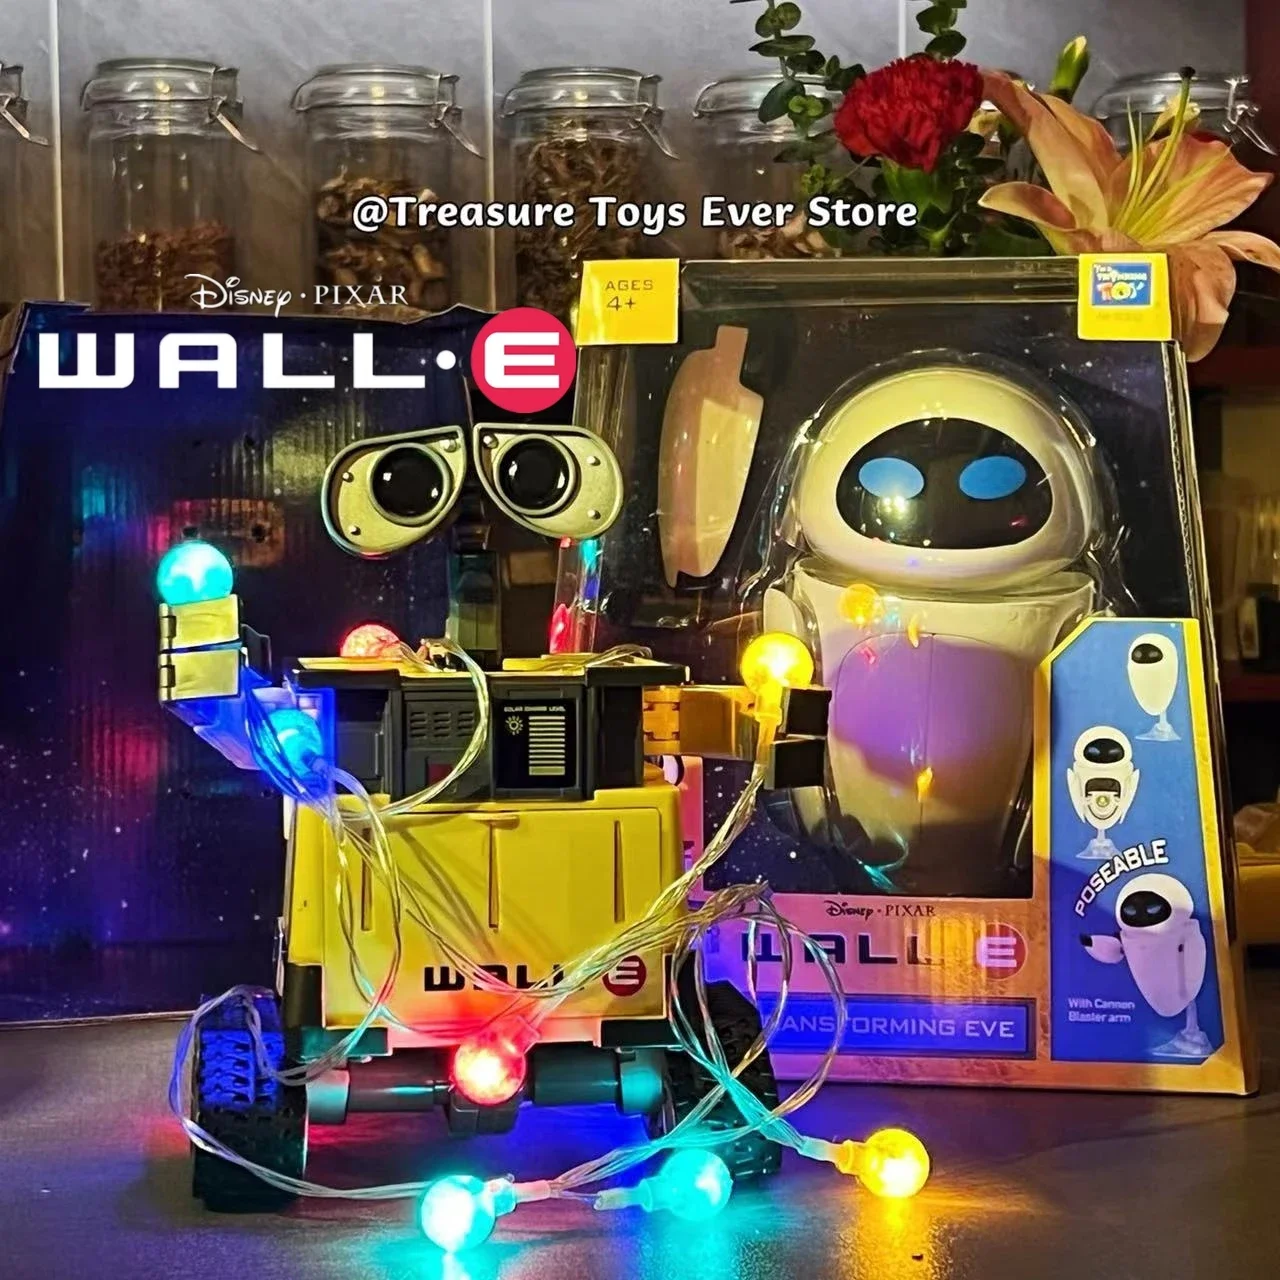  thinkway toys wall e transforming eve robot action figure model toy kid christmas gift thumb200